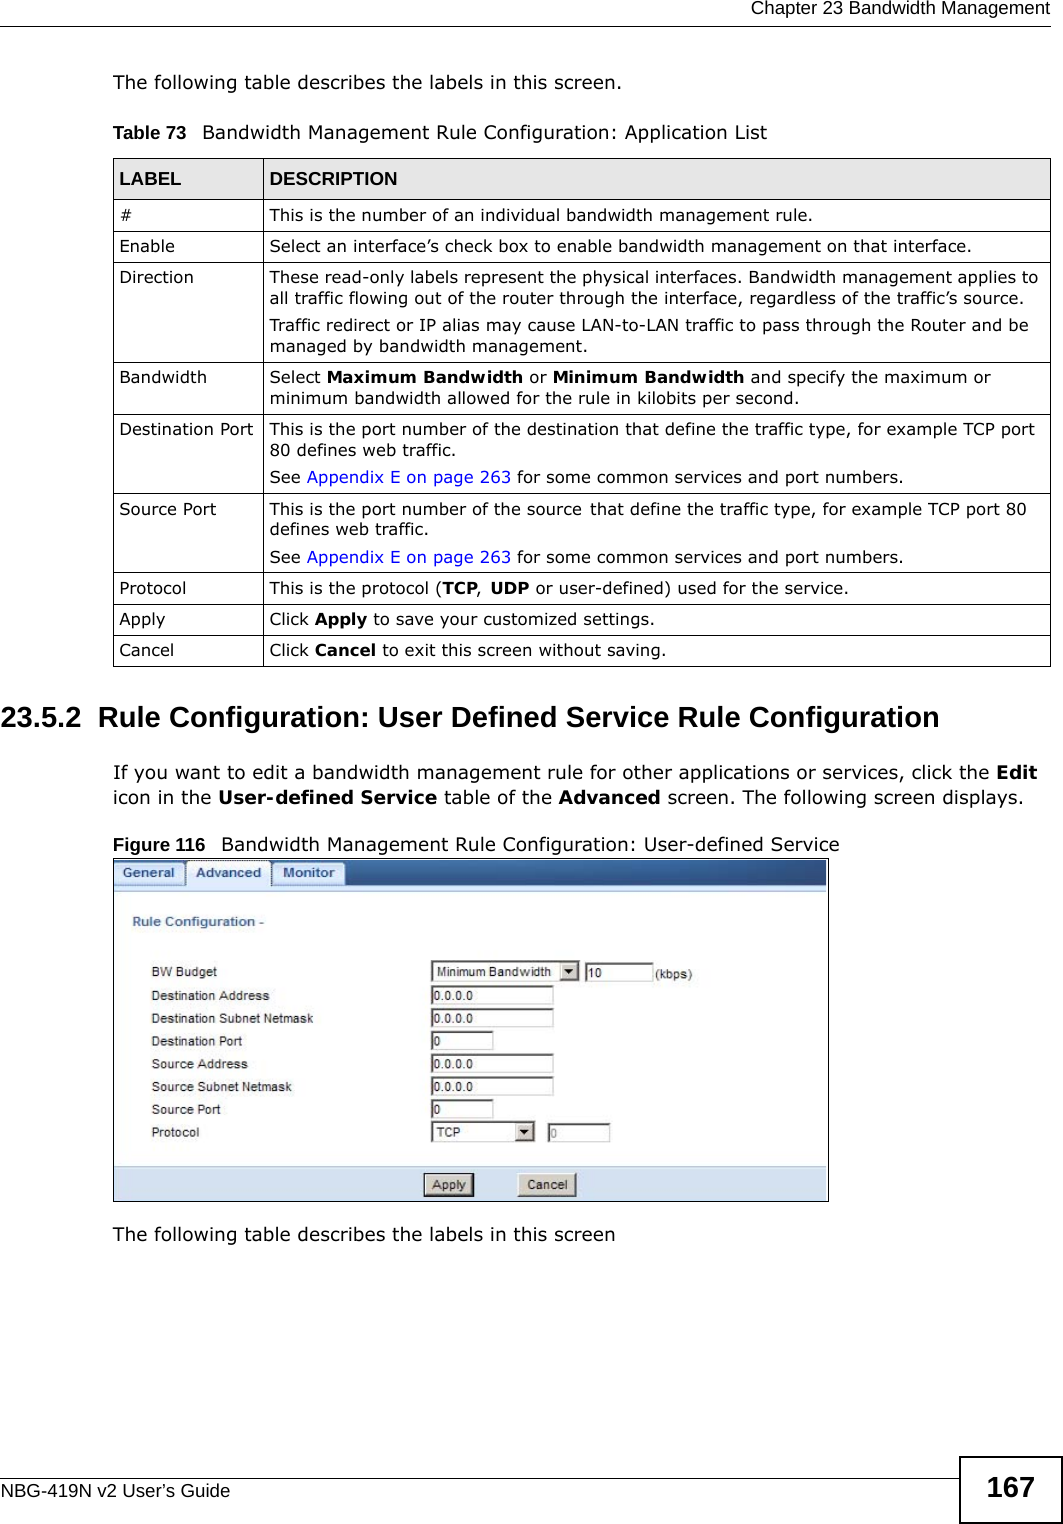  Chapter 23 Bandwidth ManagementNBG-419N v2 User’s Guide 167The following table describes the labels in this screen.23.5.2  Rule Configuration: User Defined Service Rule Configuration    If you want to edit a bandwidth management rule for other applications or services, click the Edit icon in the User-defined Service table of the Advanced screen. The following screen displays.Figure 116   Bandwidth Management Rule Configuration: User-defined Service The following table describes the labels in this screenTable 73   Bandwidth Management Rule Configuration: Application ListLABEL DESCRIPTION#This is the number of an individual bandwidth management rule.Enable Select an interface’s check box to enable bandwidth management on that interface. Direction  These read-only labels represent the physical interfaces. Bandwidth management applies to all traffic flowing out of the router through the interface, regardless of the traffic’s source.Traffic redirect or IP alias may cause LAN-to-LAN traffic to pass through the Router and be managed by bandwidth management.Bandwidth Select Maximum Bandwidth or Minimum Bandwidth and specify the maximum or minimum bandwidth allowed for the rule in kilobits per second. Destination Port This is the port number of the destination that define the traffic type, for example TCP port 80 defines web traffic.See Appendix E on page 263 for some common services and port numbers.Source Port This is the port number of the source that define the traffic type, for example TCP port 80 defines web traffic.See Appendix E on page 263 for some common services and port numbers.Protocol This is the protocol (TCP, UDP or user-defined) used for the service.Apply Click Apply to save your customized settings.Cancel Click Cancel to exit this screen without saving.